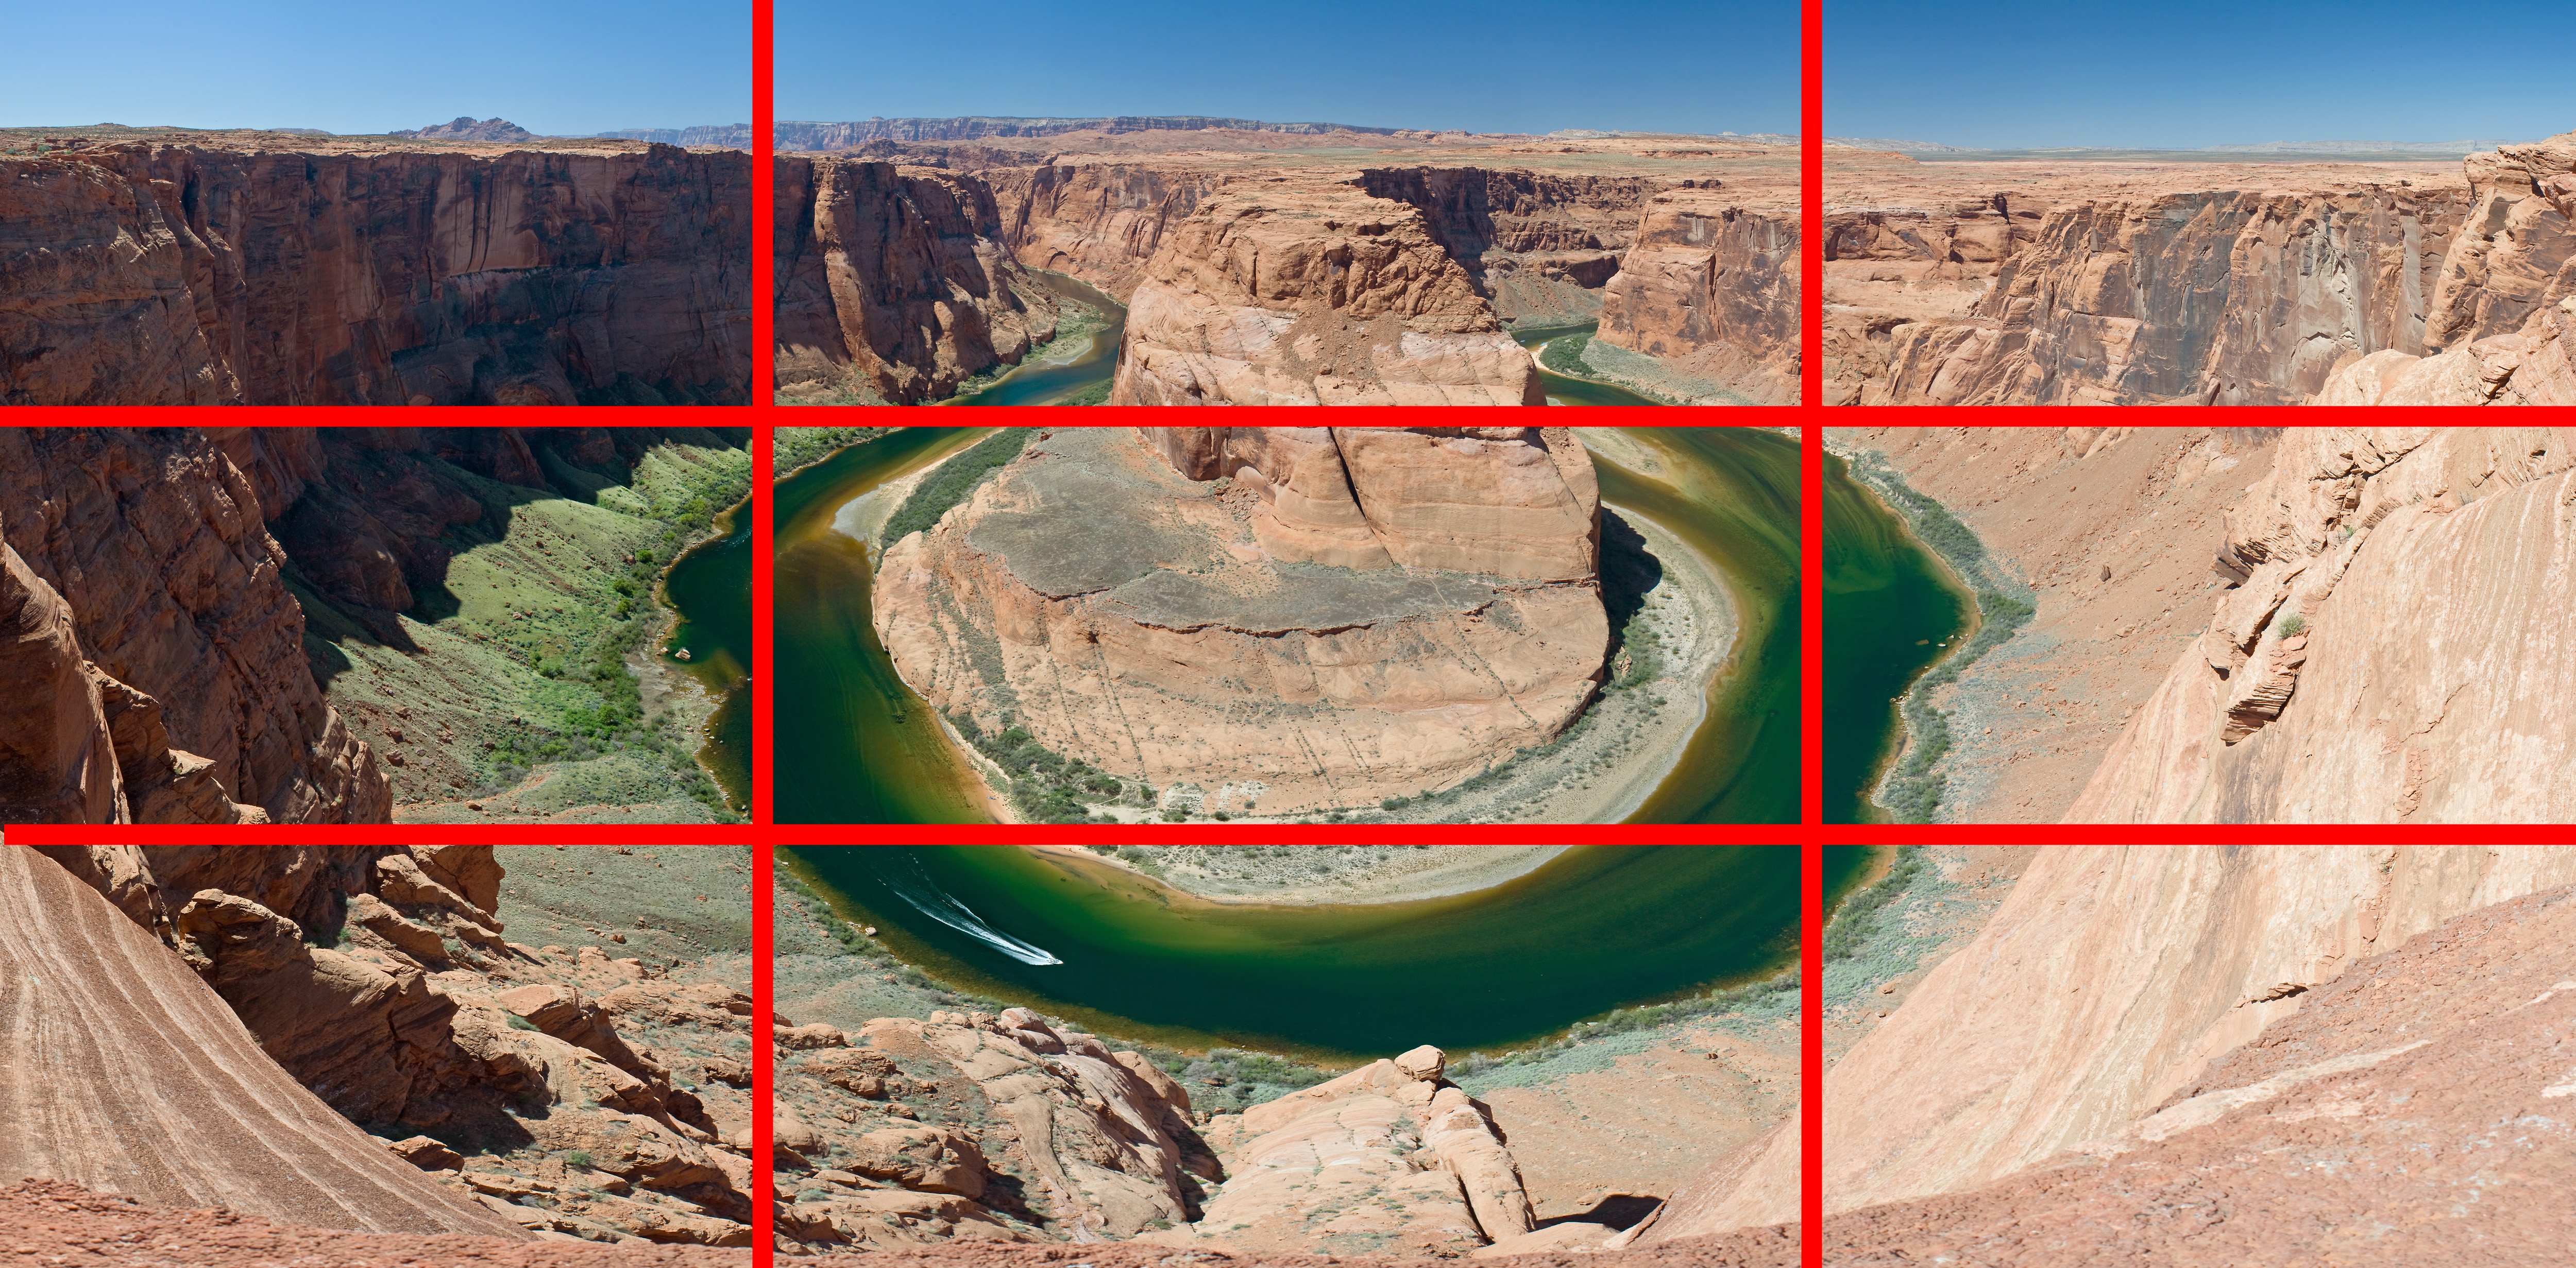 Most important element of photography Rule of Thirds